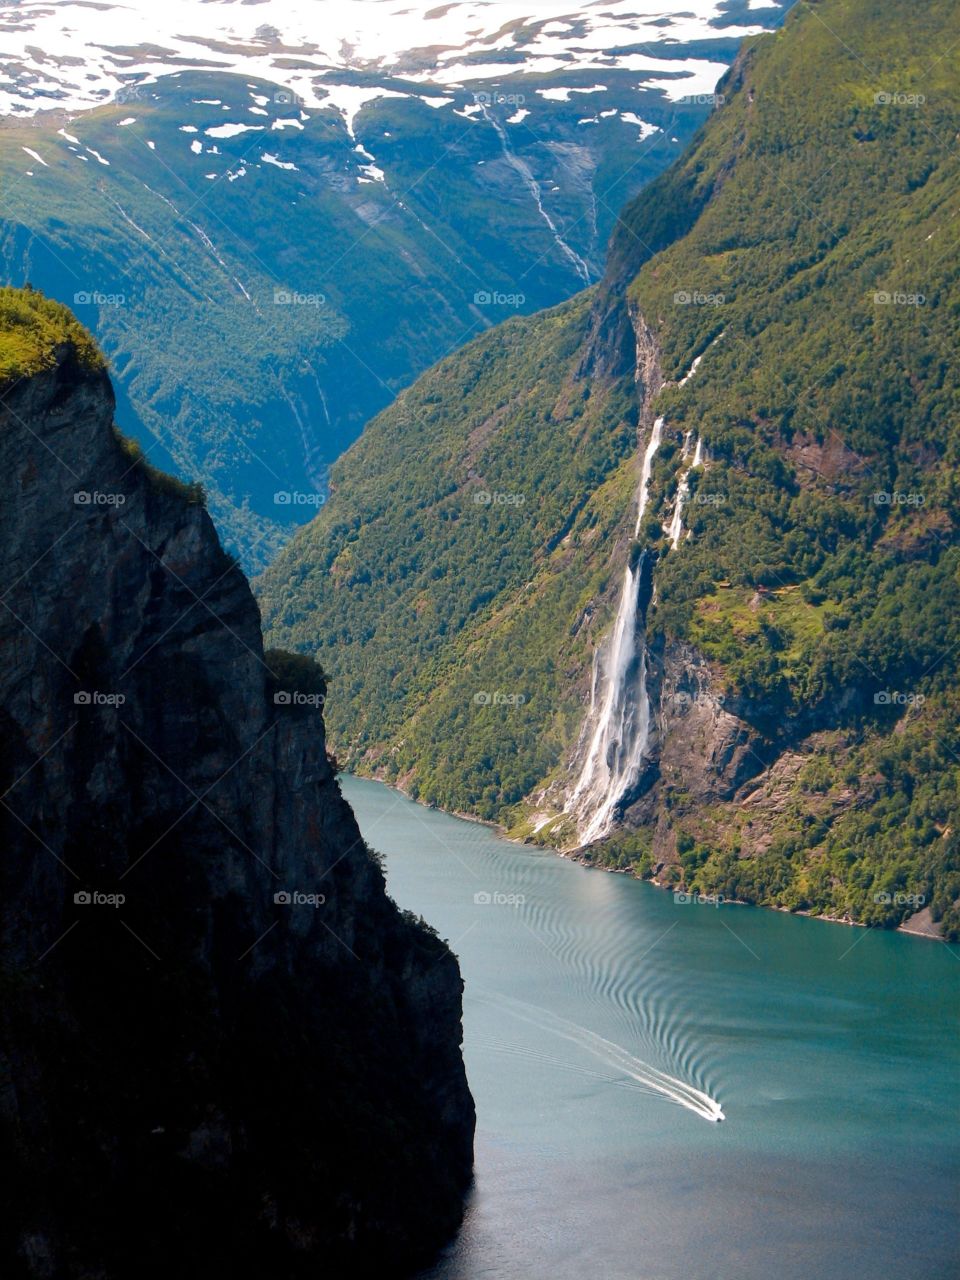 Geiranger Waterfall, Norway. The Geiranger Fjord with the Seven Sisters waterfall, Norway